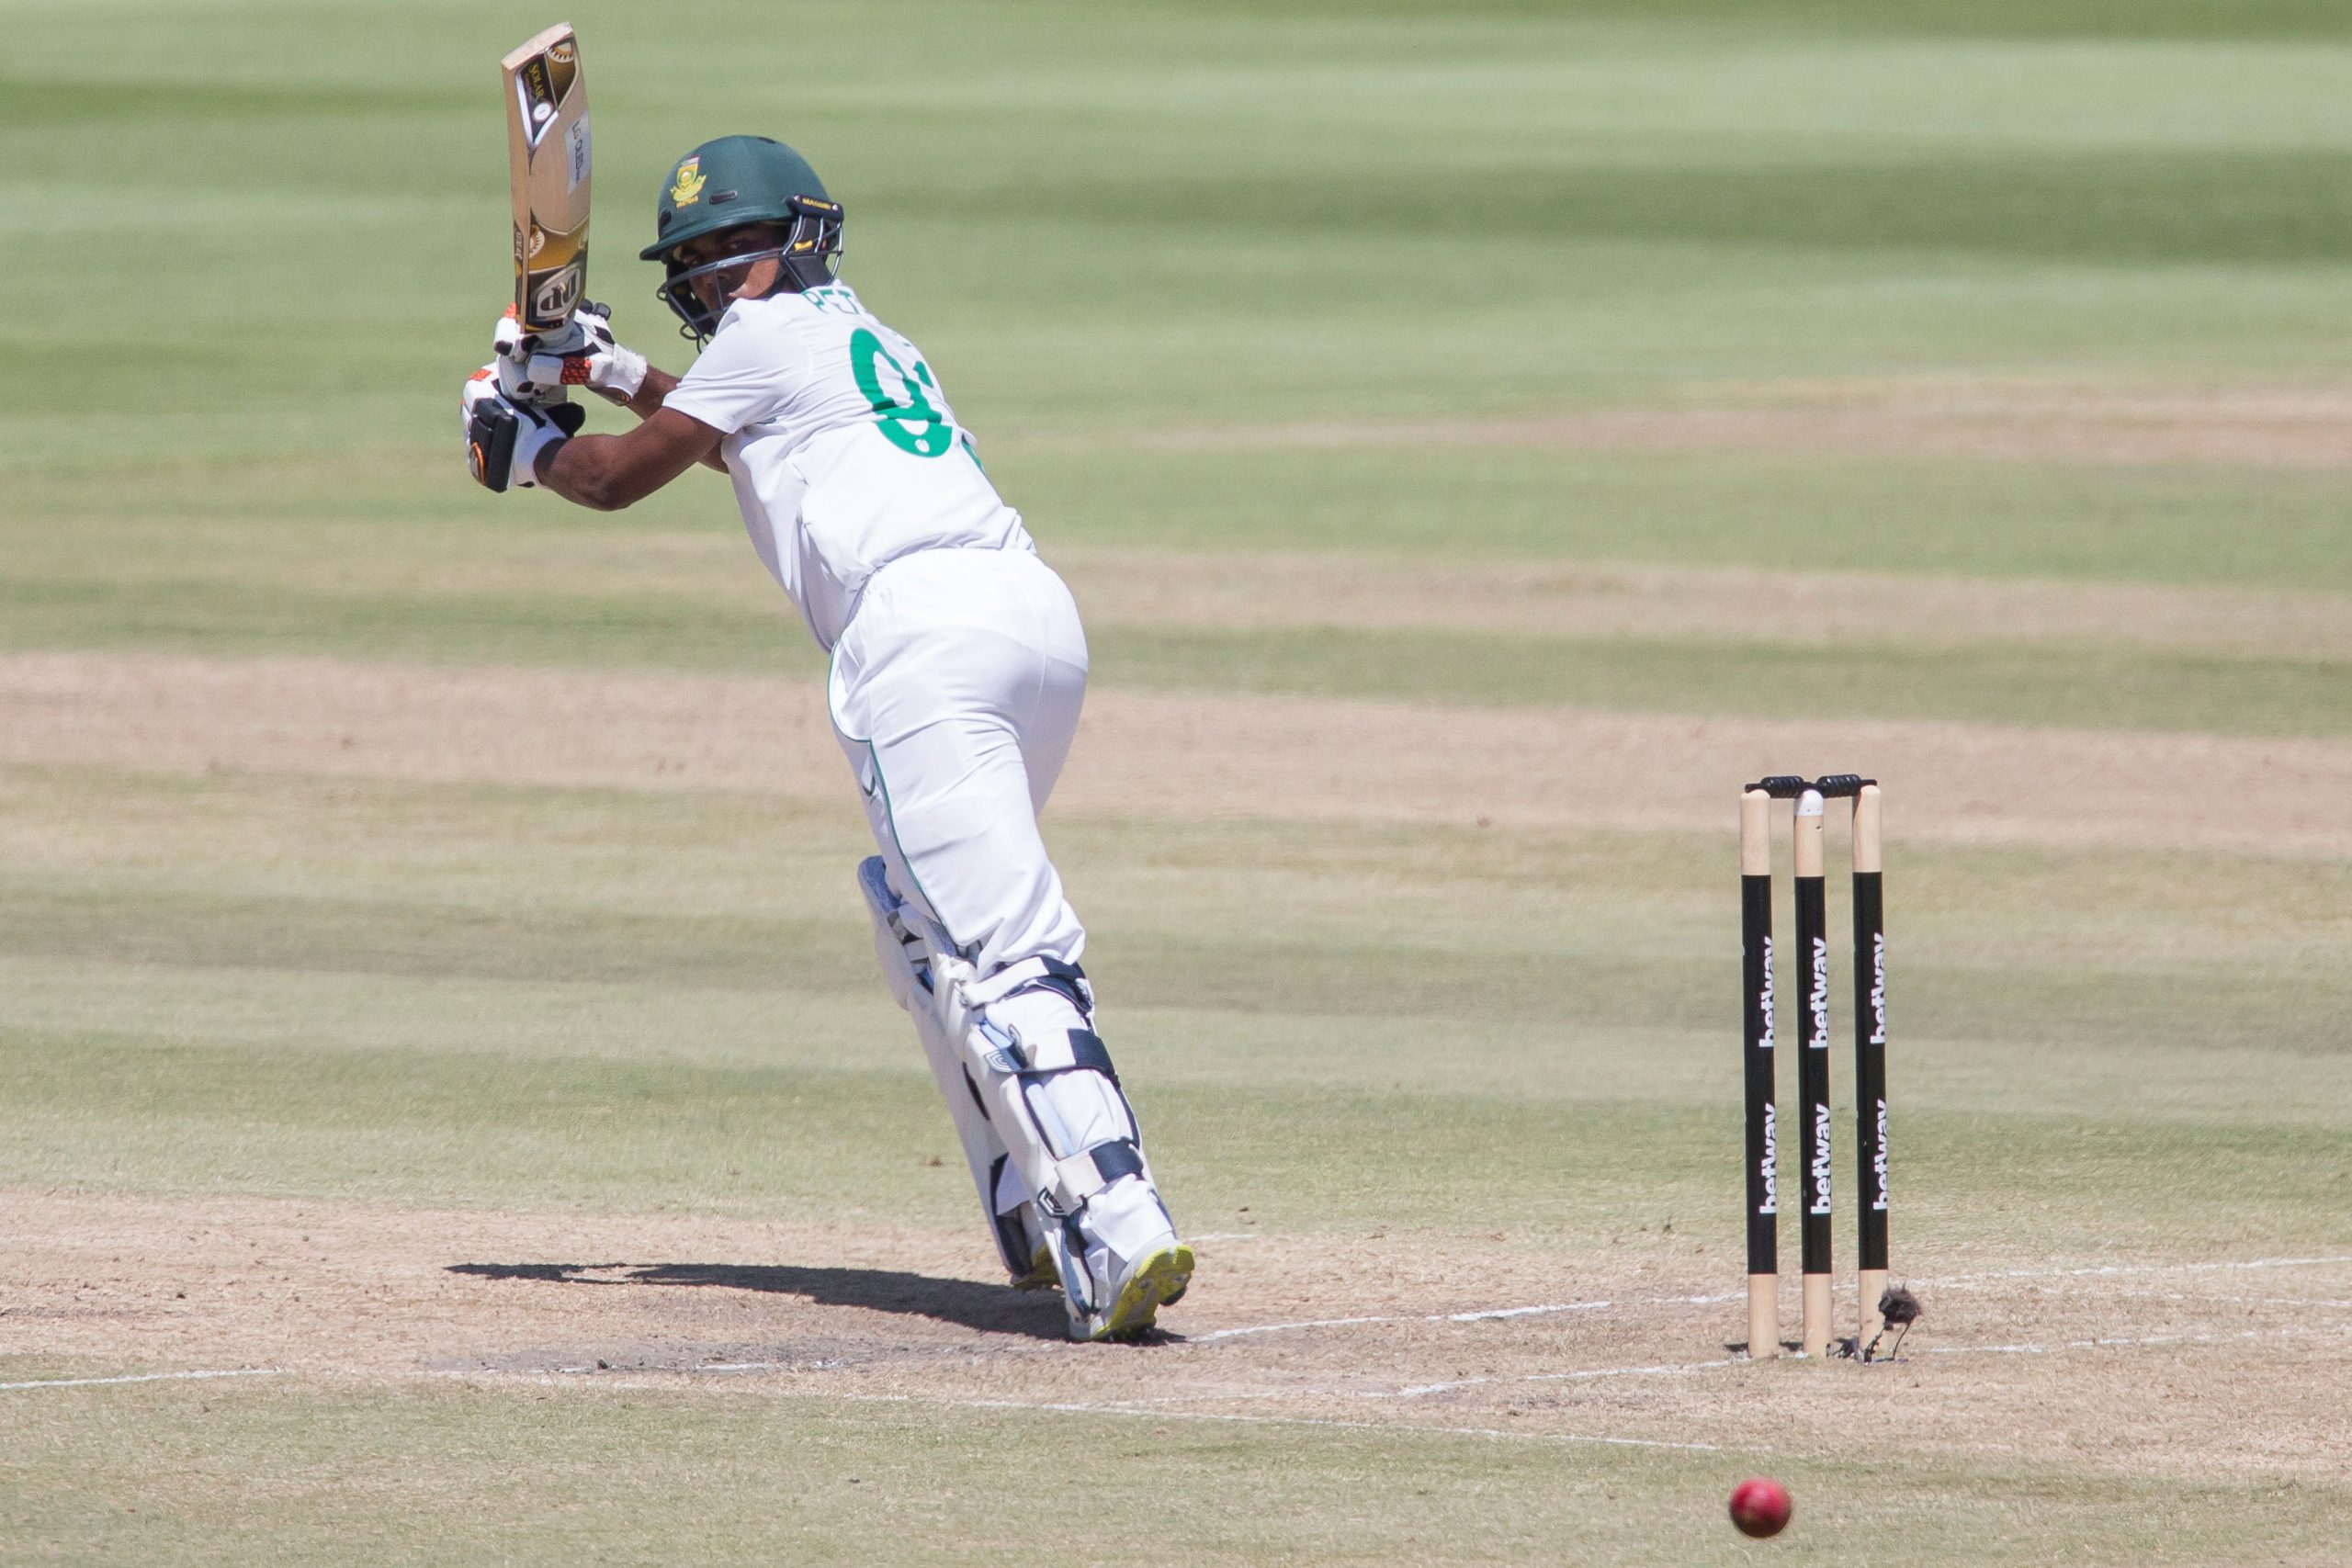 South Africa beat India by 7 wickets to win Test series 2-1 on Day 4